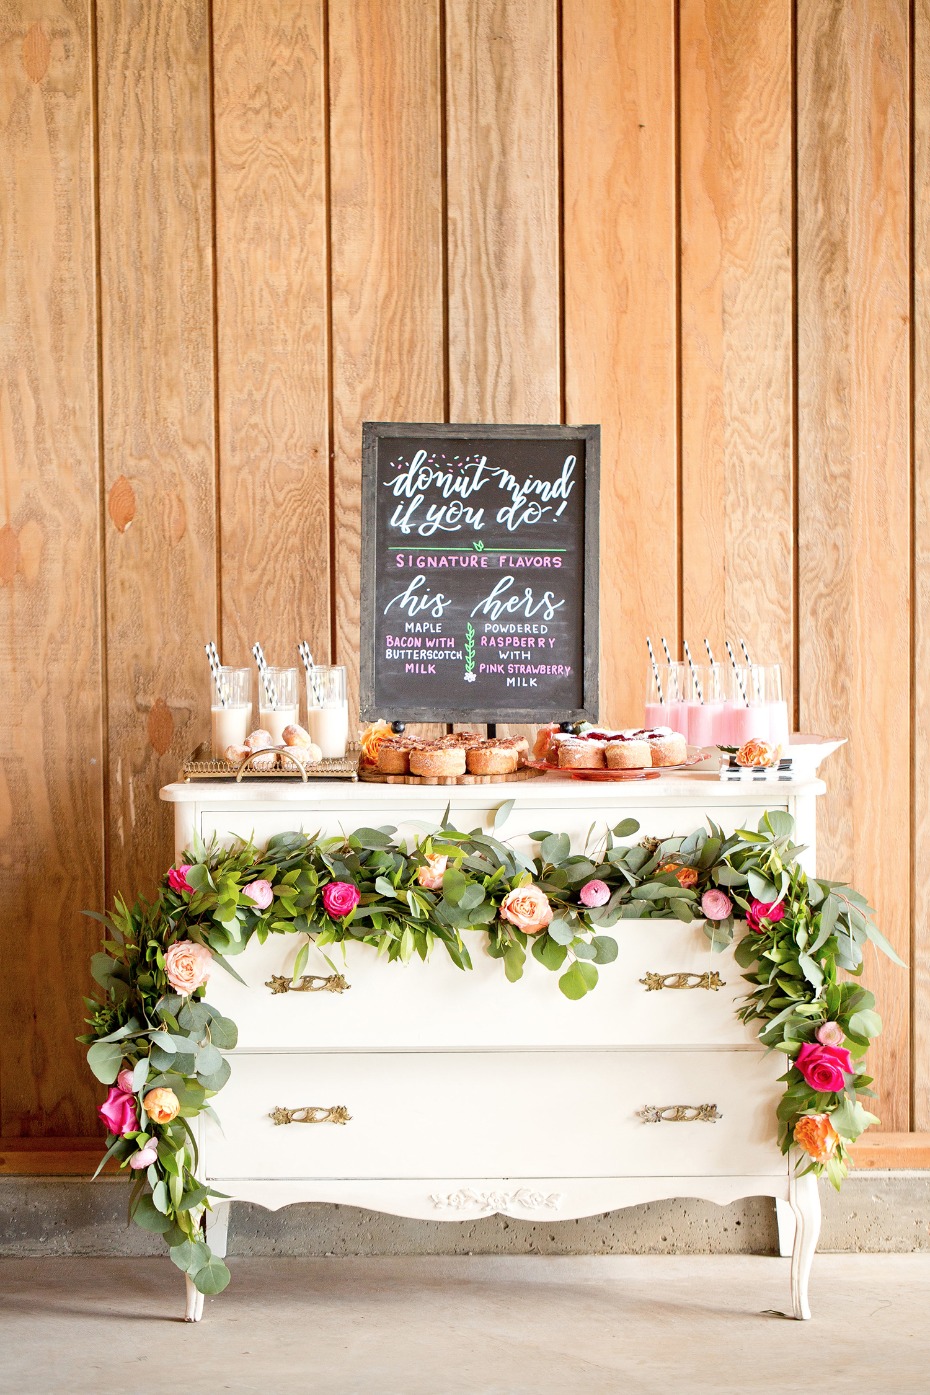 Donuts and milk dessert table